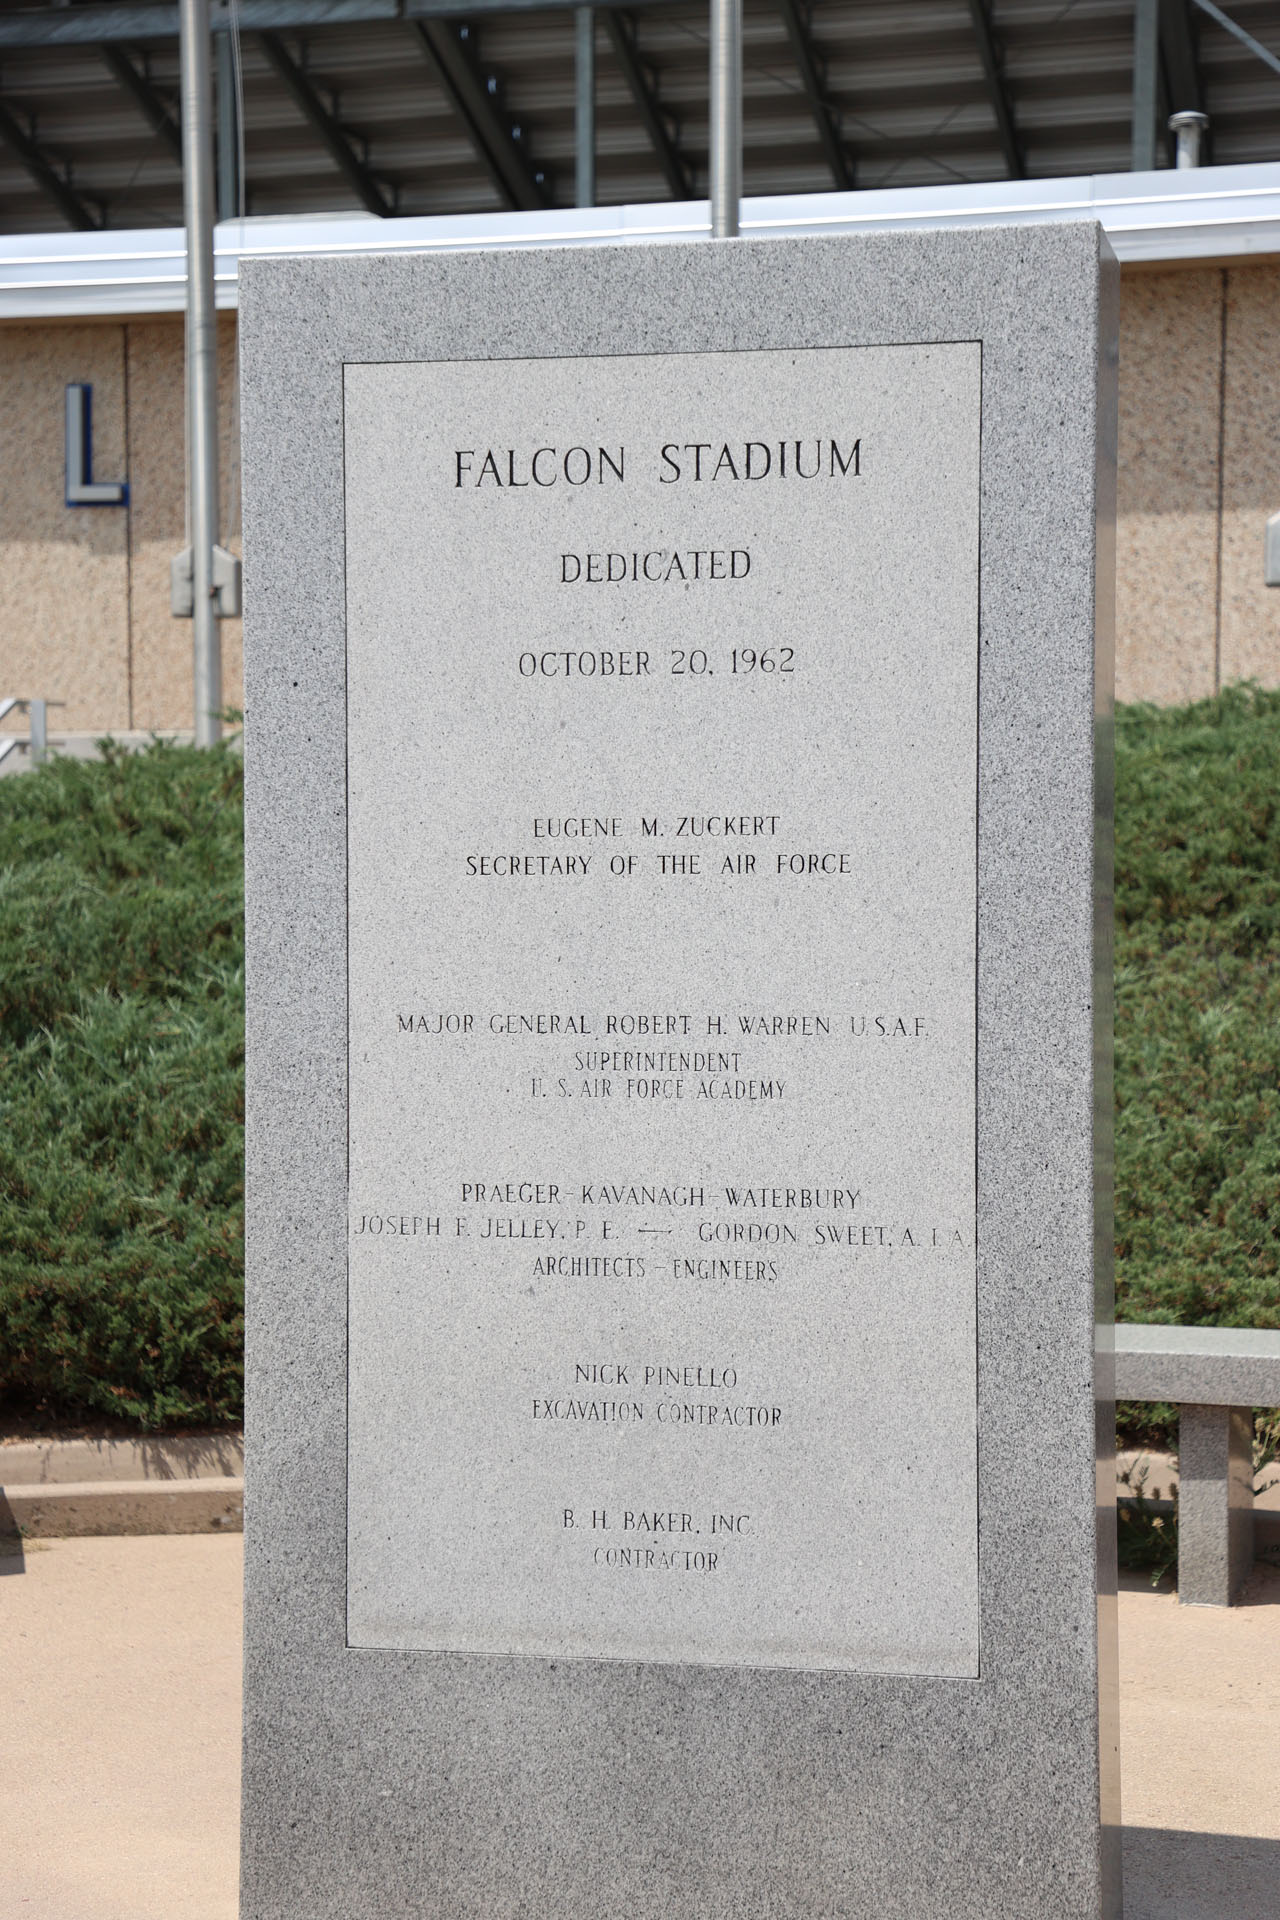 Outside Falcon Stadium on the east side